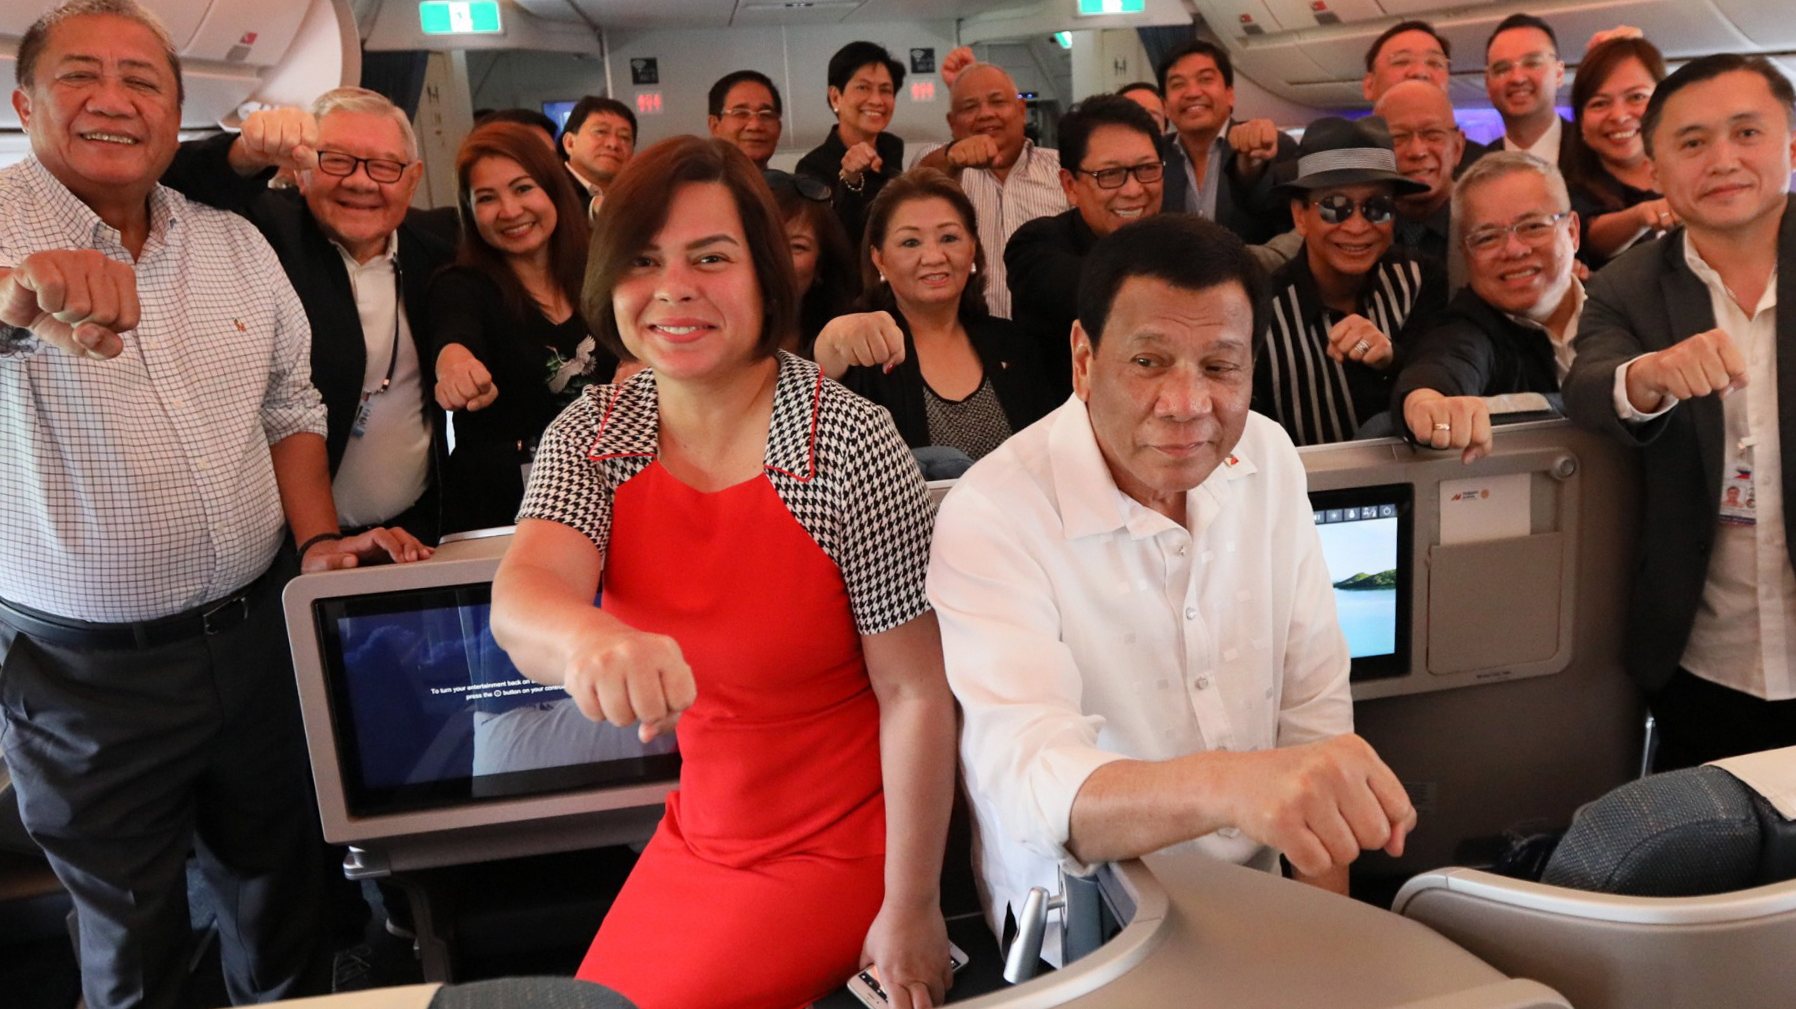 epa06993773 A handout photo made available by the Presidential Photographers Division (PPD) shows President Rodrigo Duterte (R, front) with his daughter, Davao City Mayor Sara Duterte-Carpio (L, front) and members of his delegation posing for a photo on a flight bound for Israel on 02 September 2018 (issued on 03 September 2018). Duterte is on an official one week visit to Israel and Jordan.  EPA/KING RODRIGUEZ / PPD / HANDOUT  HANDOUT EDITORIAL USE ONLY/NO SALES